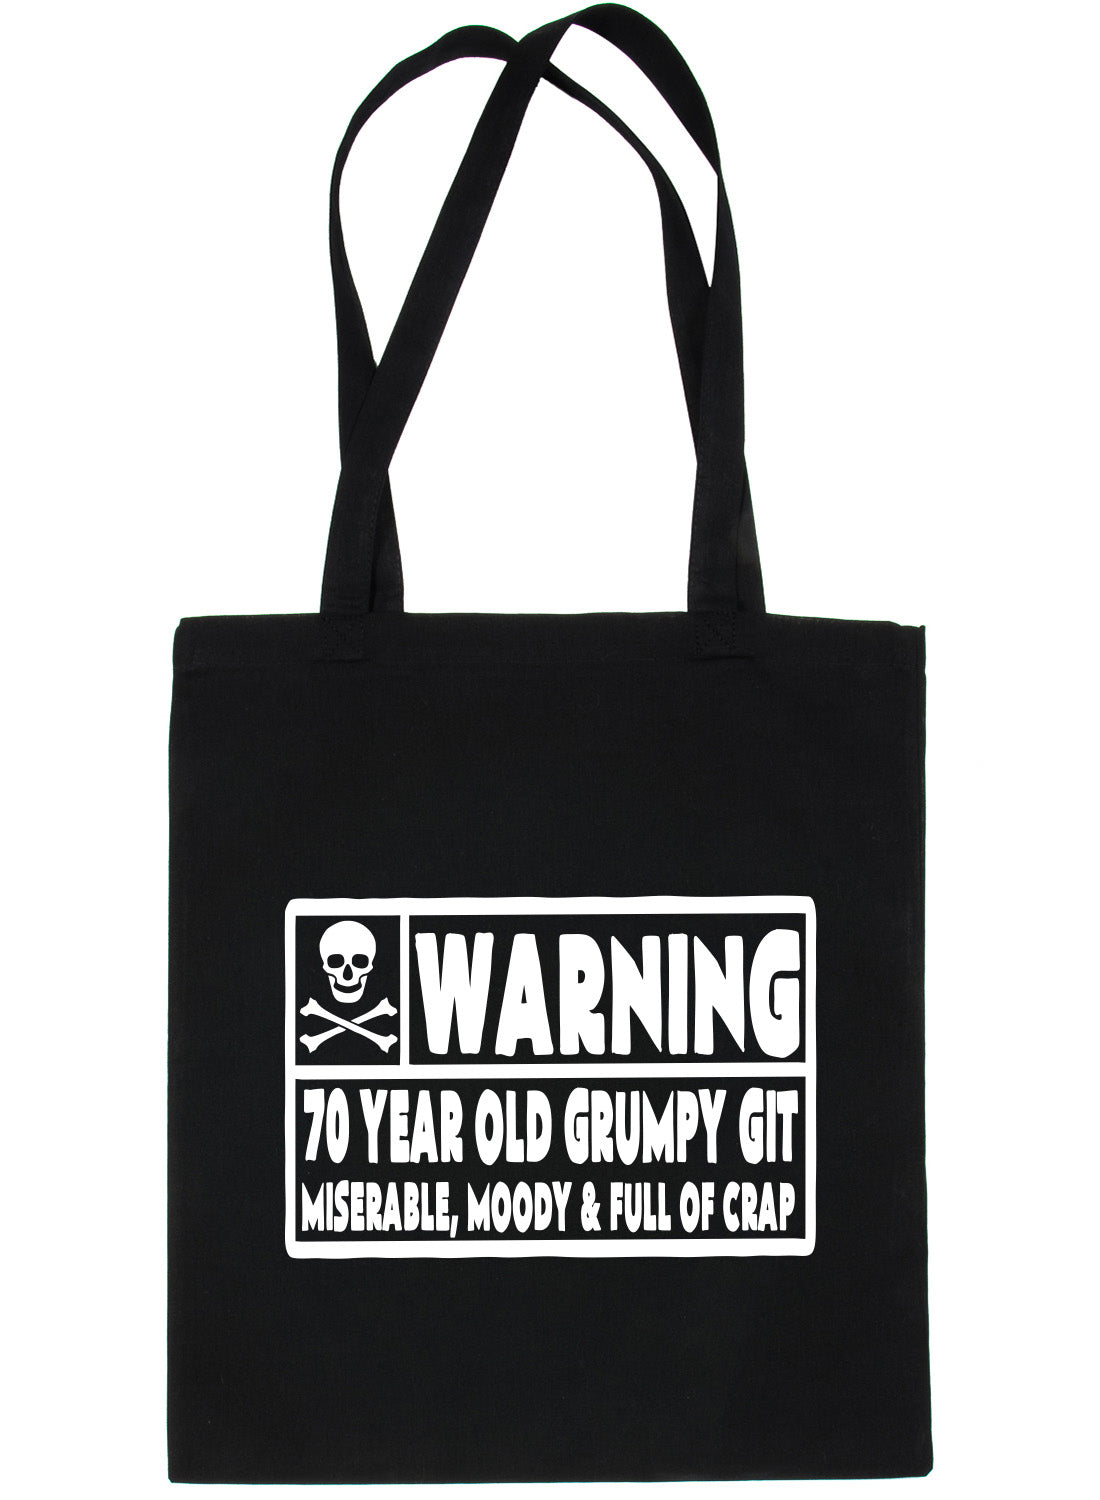 70 Year Old Git 70th Birthday Present Shopping Tote Bag Ladies Gift